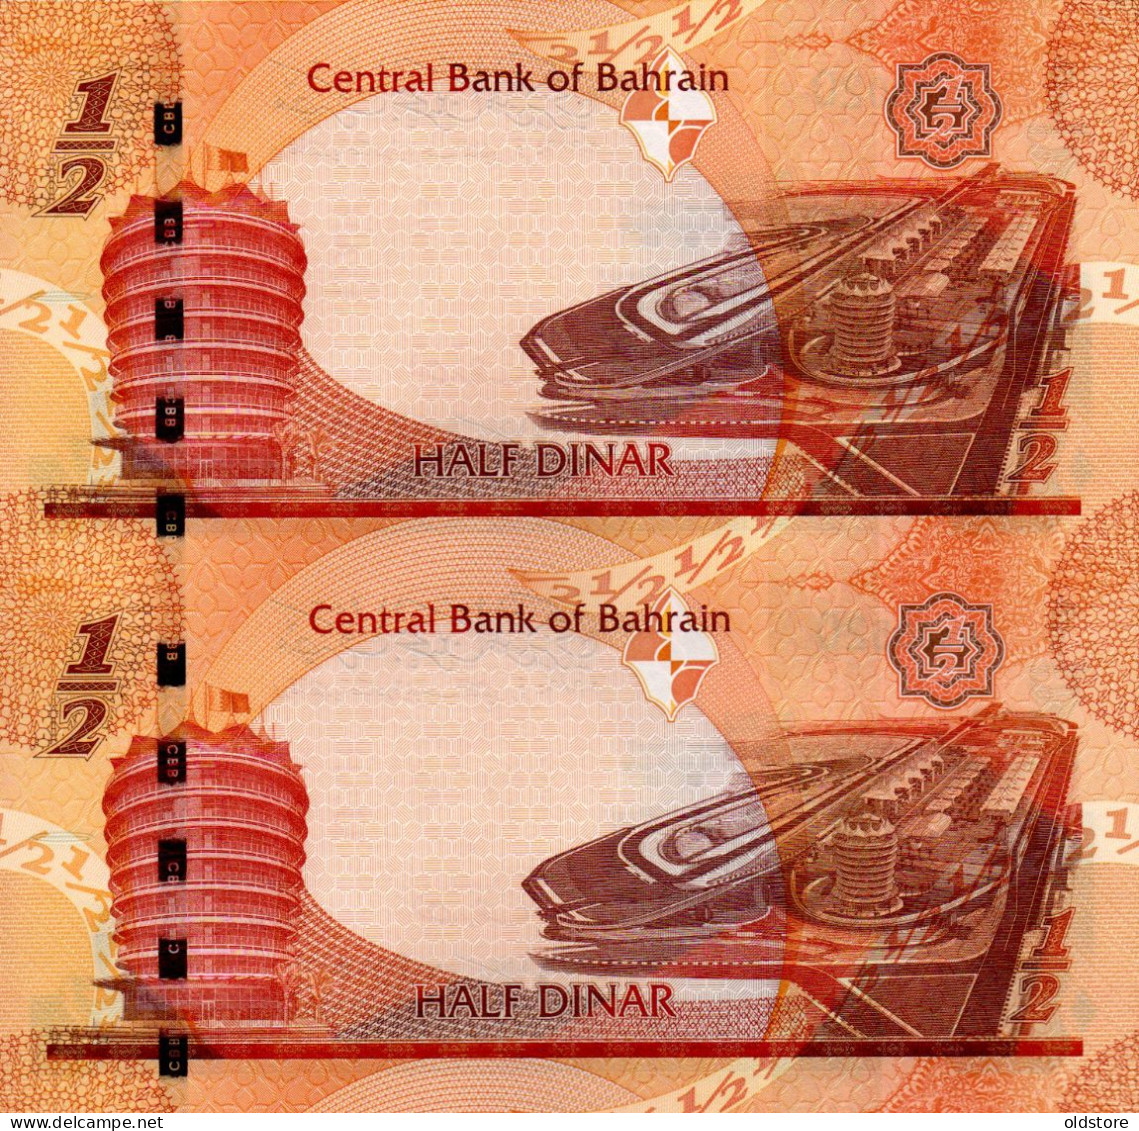 Bahrain - 1/2 Dinar - 2 Pieces Of Uncut Sheet - Issue 2008 New Signature - Similarity In The Last Two Numbers UNC Rare - Bahrein